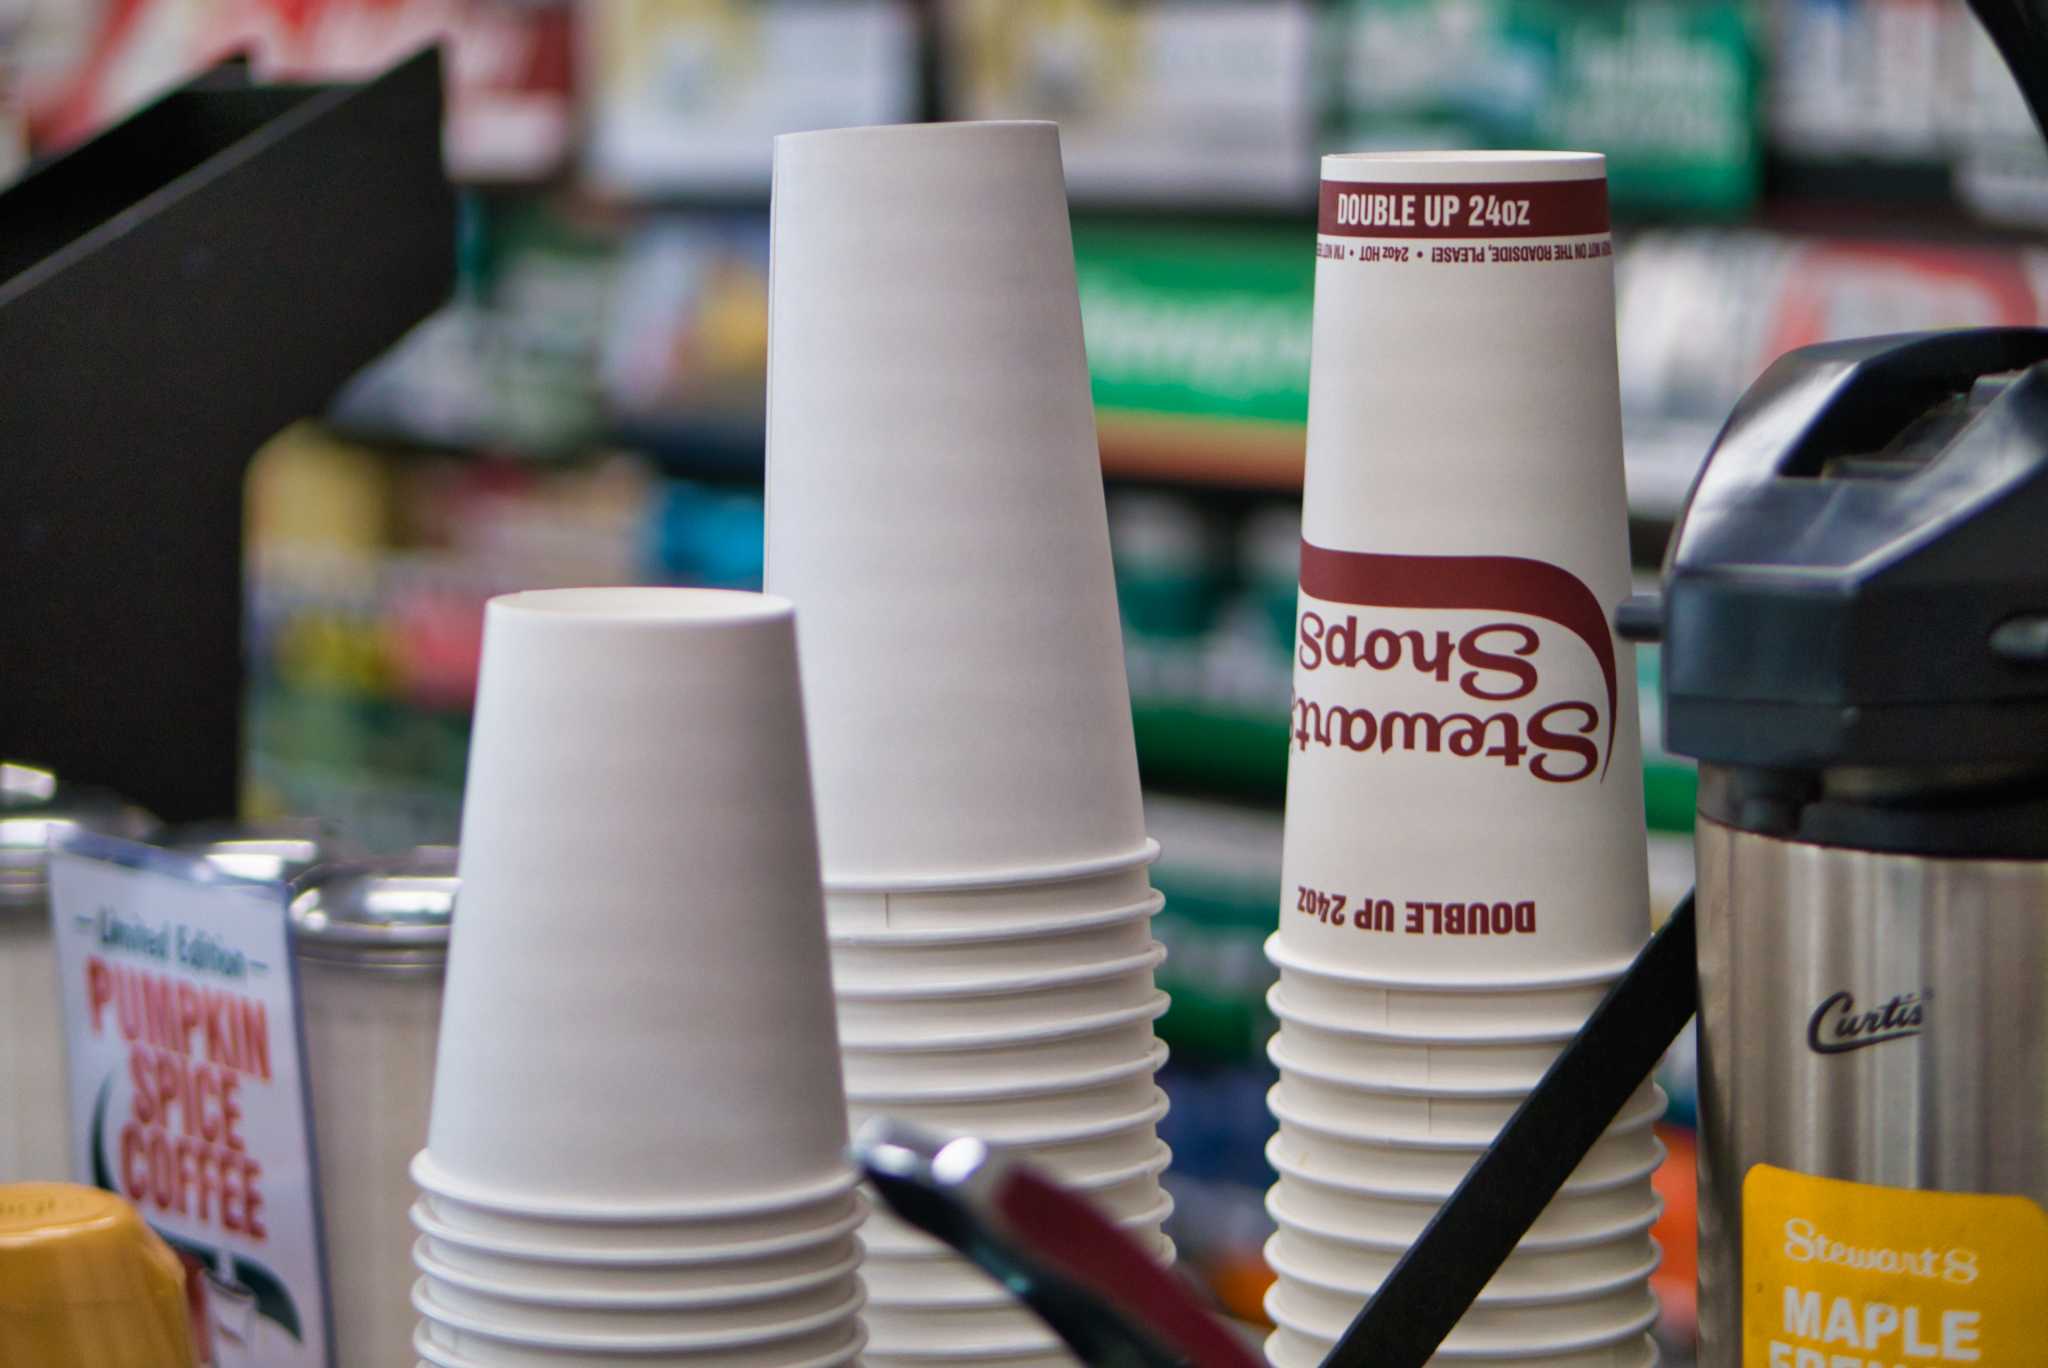 Stewart's Shops to offer free coffee on New Year's Eve